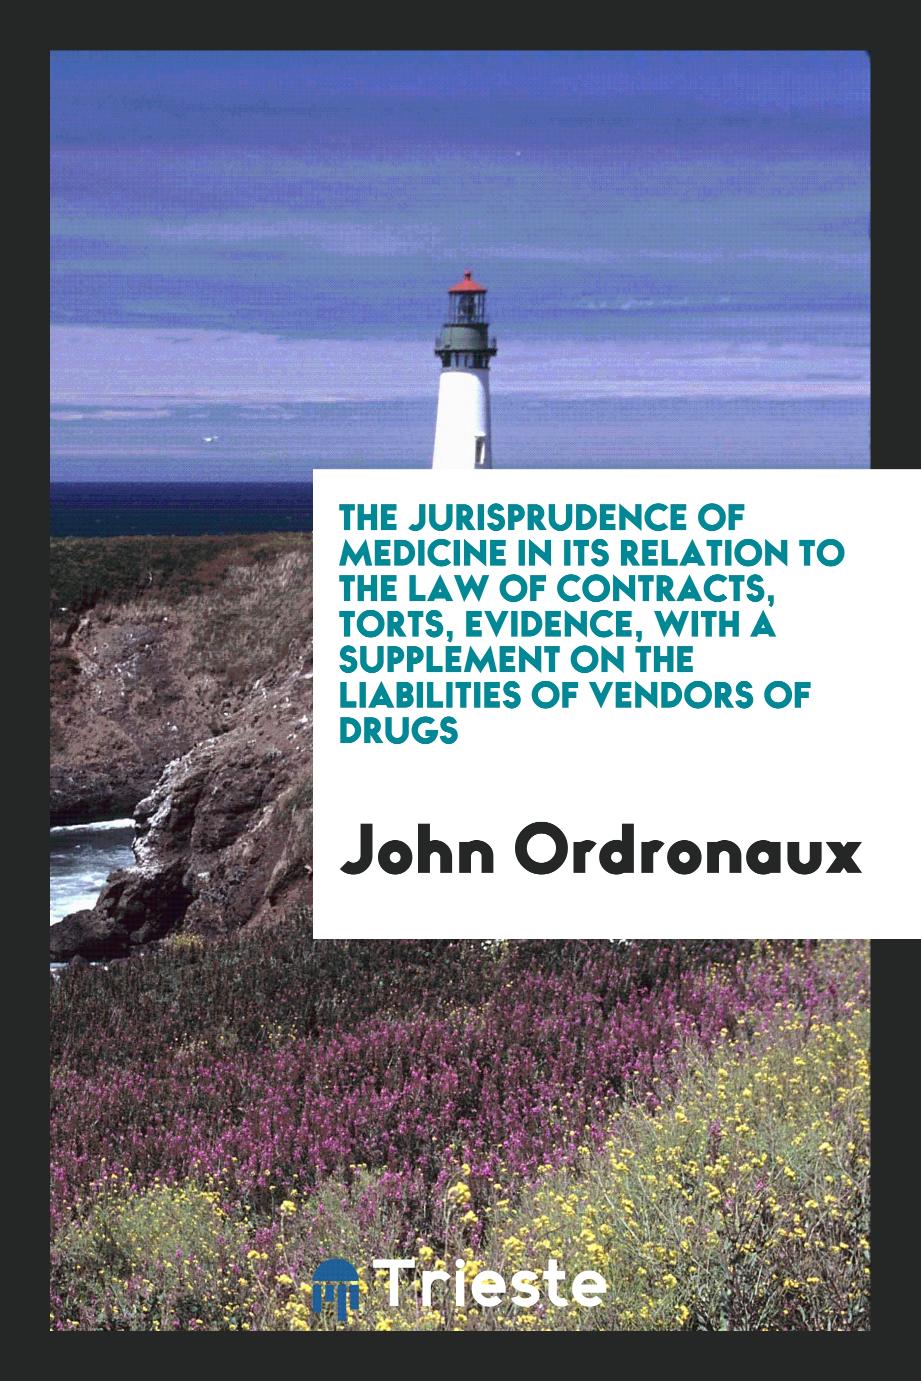 The Jurisprudence of Medicine in Its Relation to the Law of Contracts, Torts, Evidence, with a Supplement on the Liabilities of Vendors of Drugs